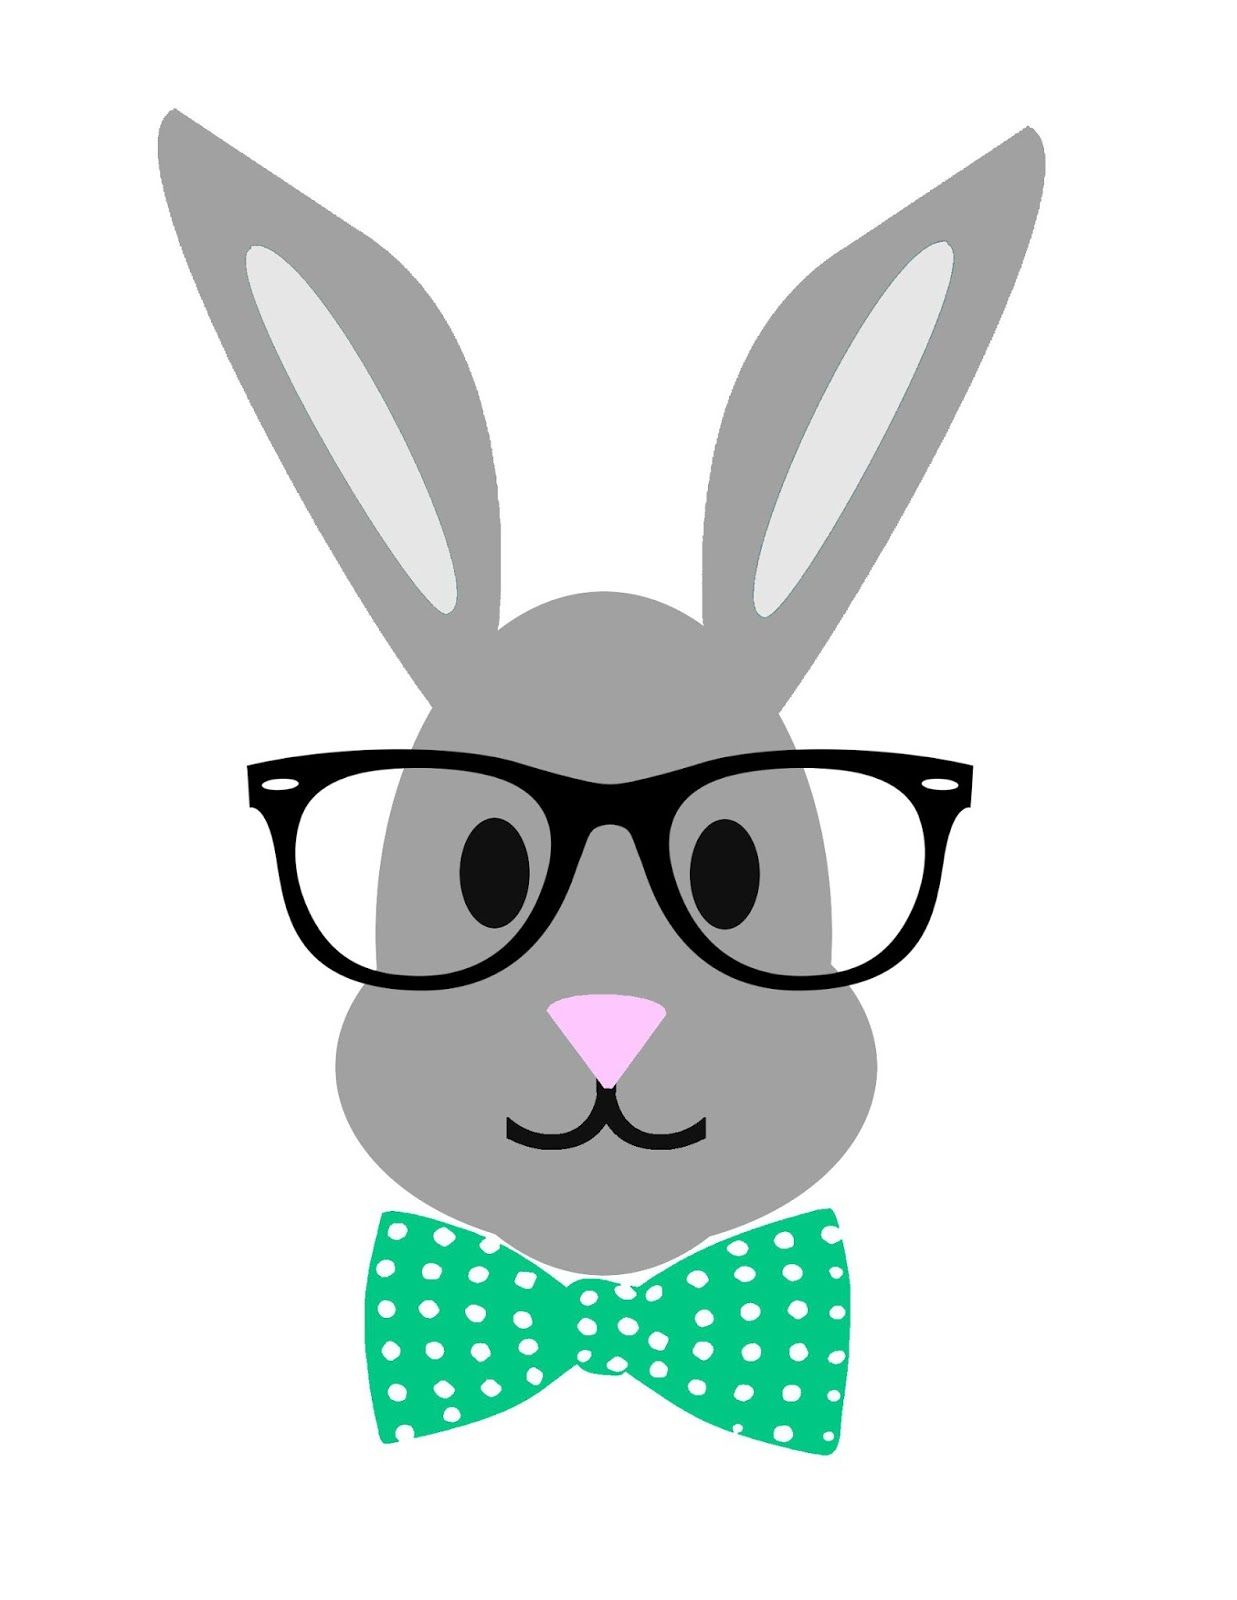 Bowtie clipart hipster, Bowtie hipster Transparent FREE for.